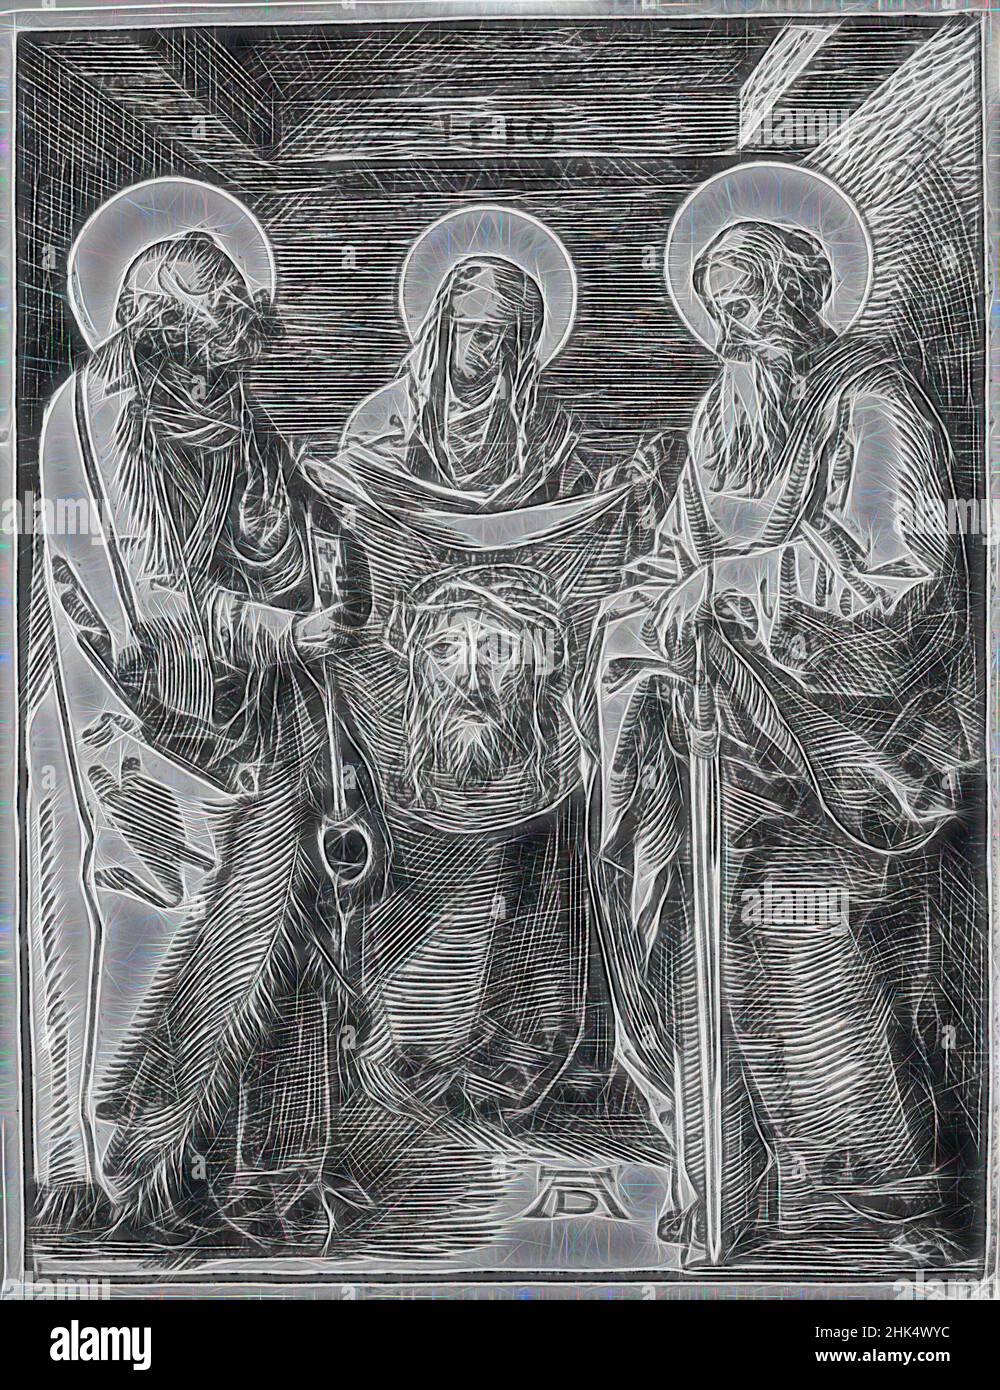 Inspired by Saint Veronica Between Saints Peter and Paul, The Small Passion, Albrecht Dürer, German, 1471-1528, Woodcut on laid paper, Germany, 1510; edition of 1511, Sheet: 5 1/8 x 5 1/16 in., 13 x 12.9 cm, Christ, Durer, saints, Small Passion, woodcut, Reimagined by Artotop. Classic art reinvented with a modern twist. Design of warm cheerful glowing of brightness and light ray radiance. Photography inspired by surrealism and futurism, embracing dynamic energy of modern technology, movement, speed and revolutionize culture Stock Photo